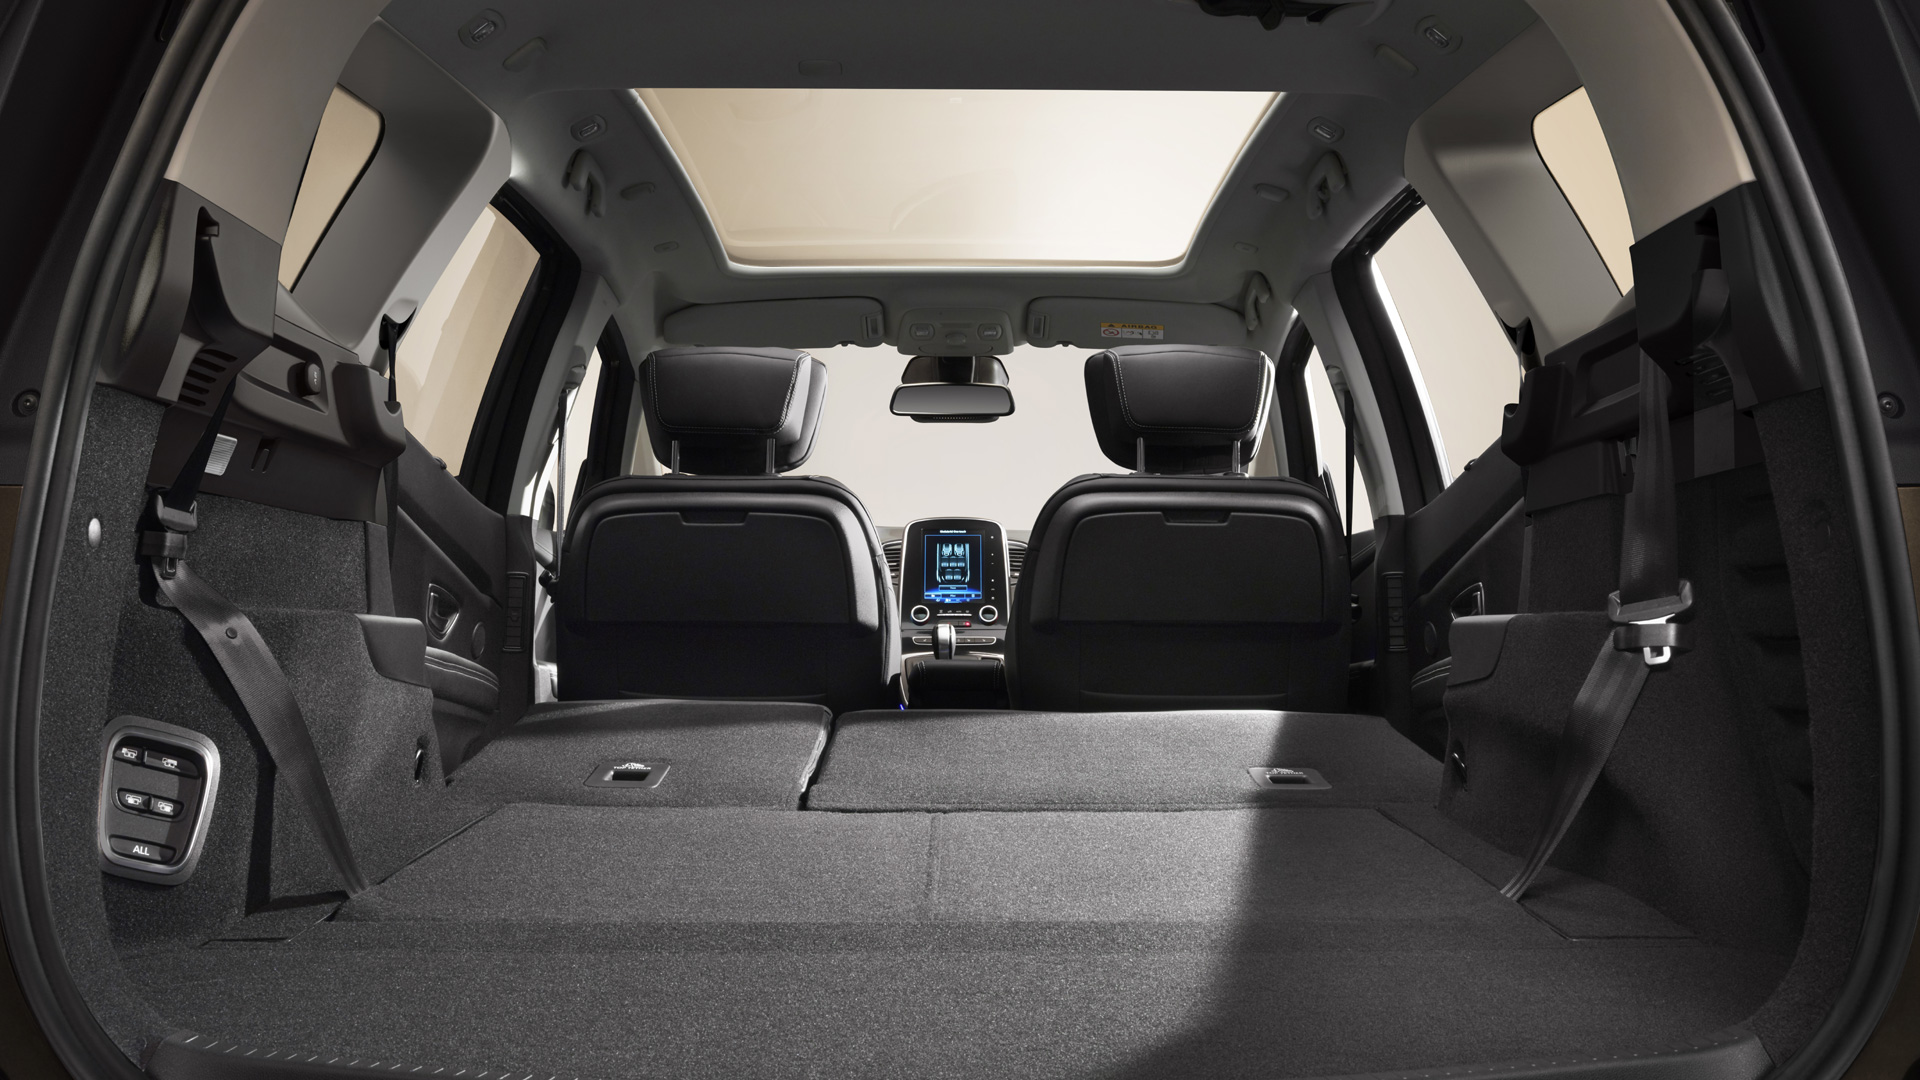 2016 Renault Grand Scenic boot space